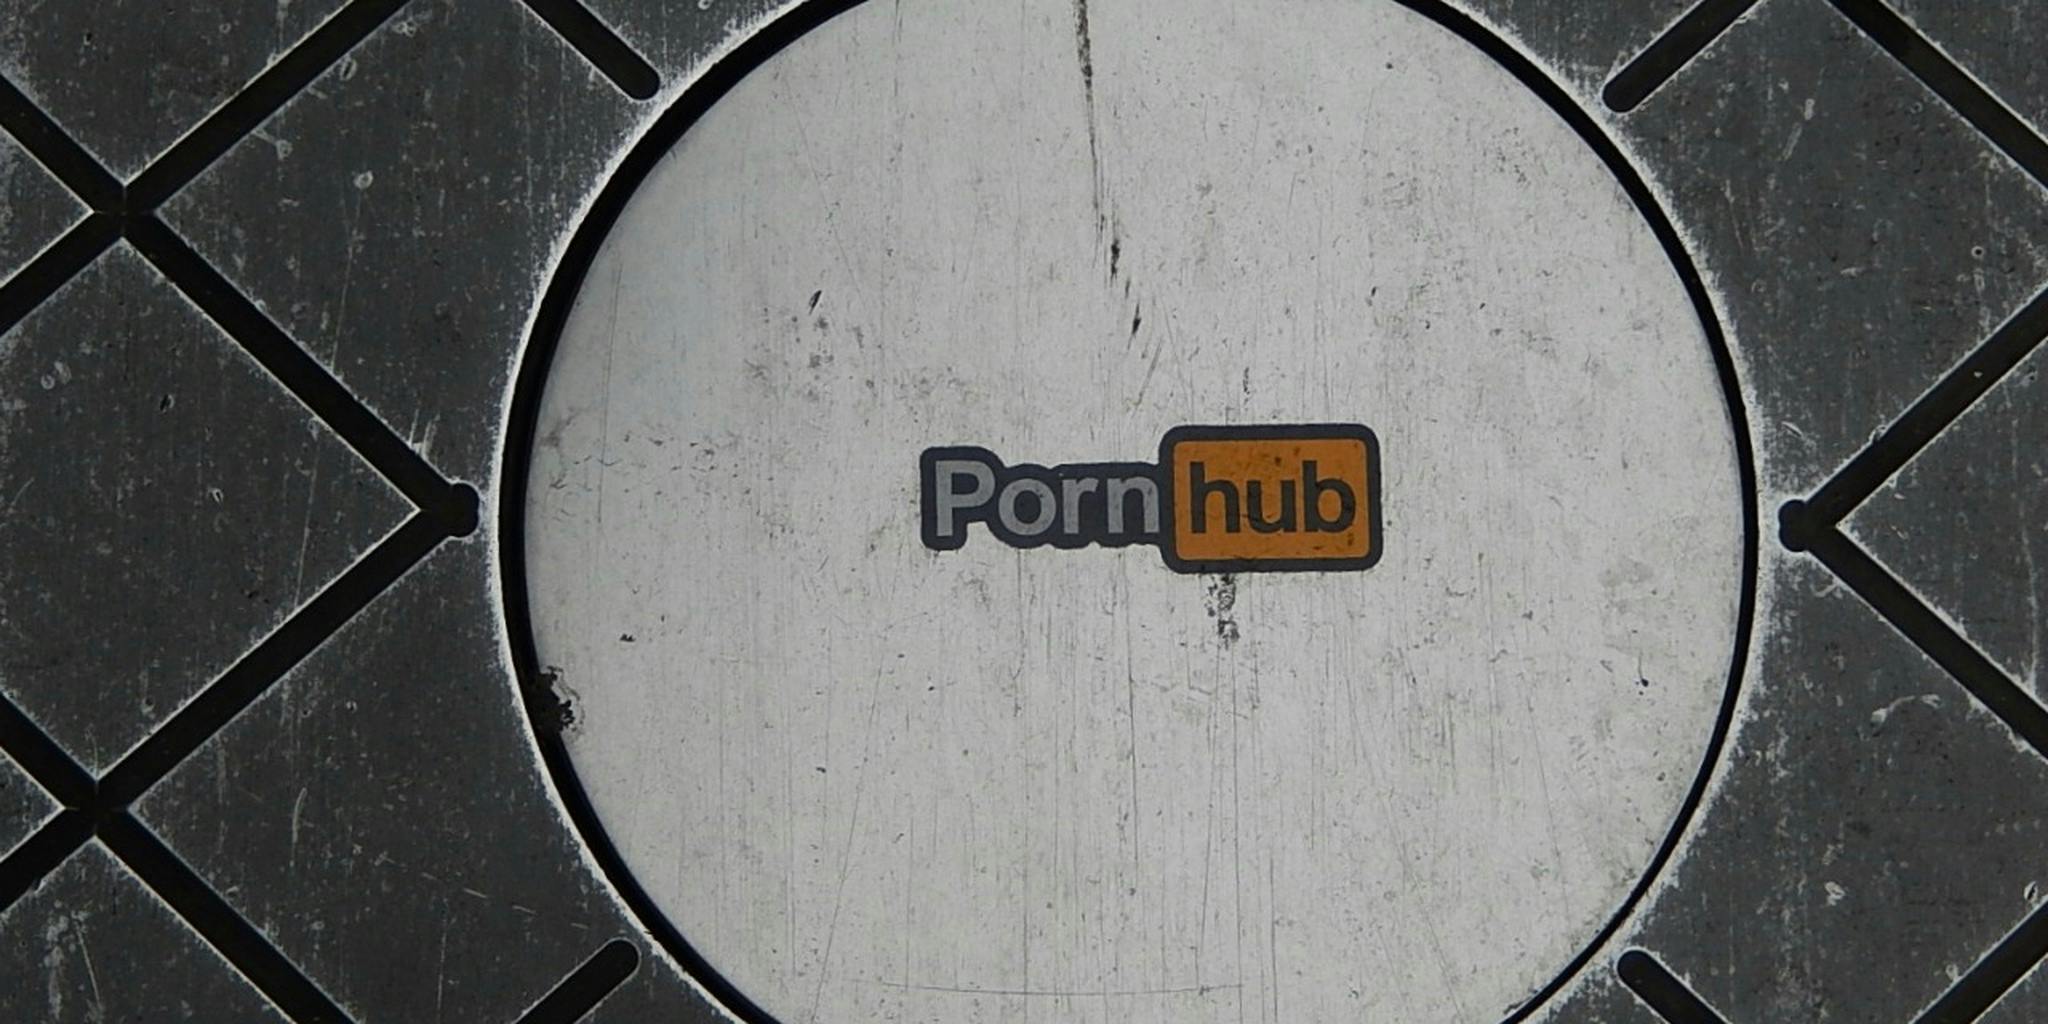 Pornhub wants to turn Vine into a hub for 6-second porn